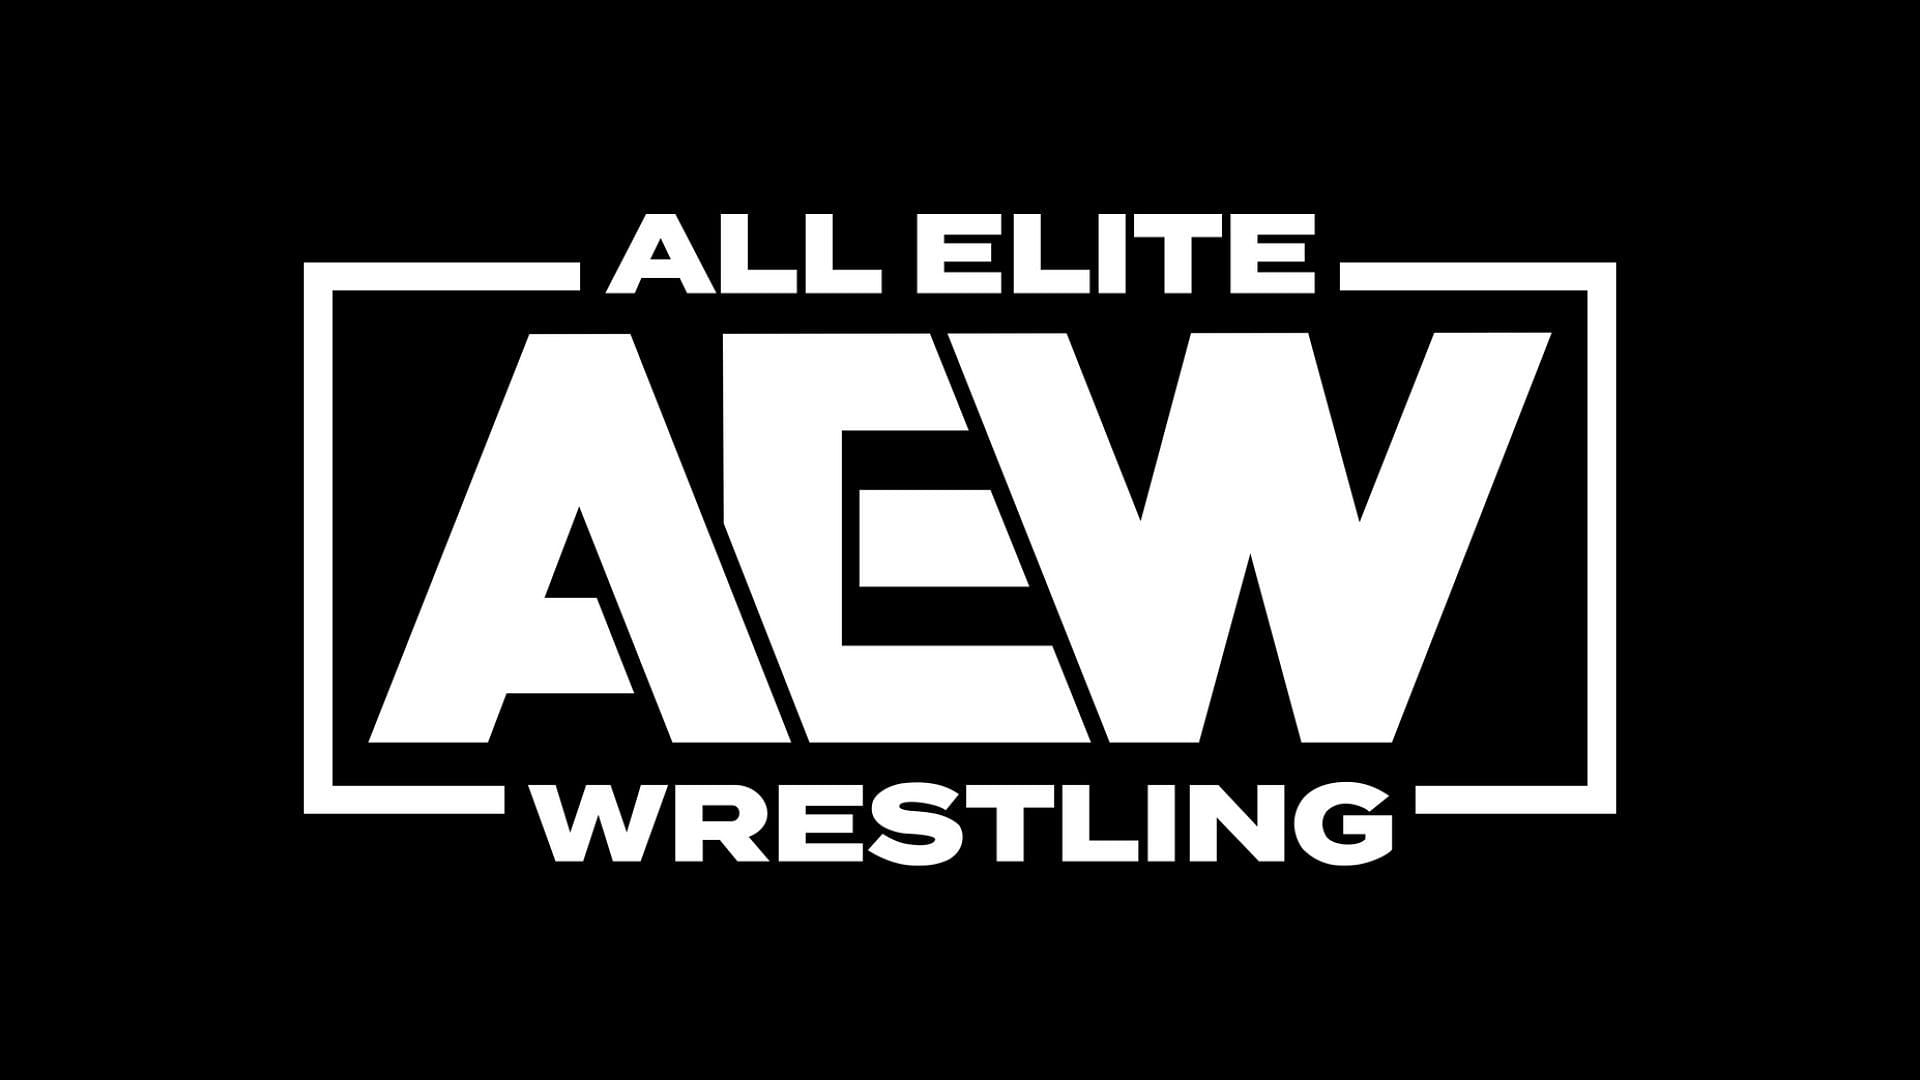 Could this star someday return to AEW?